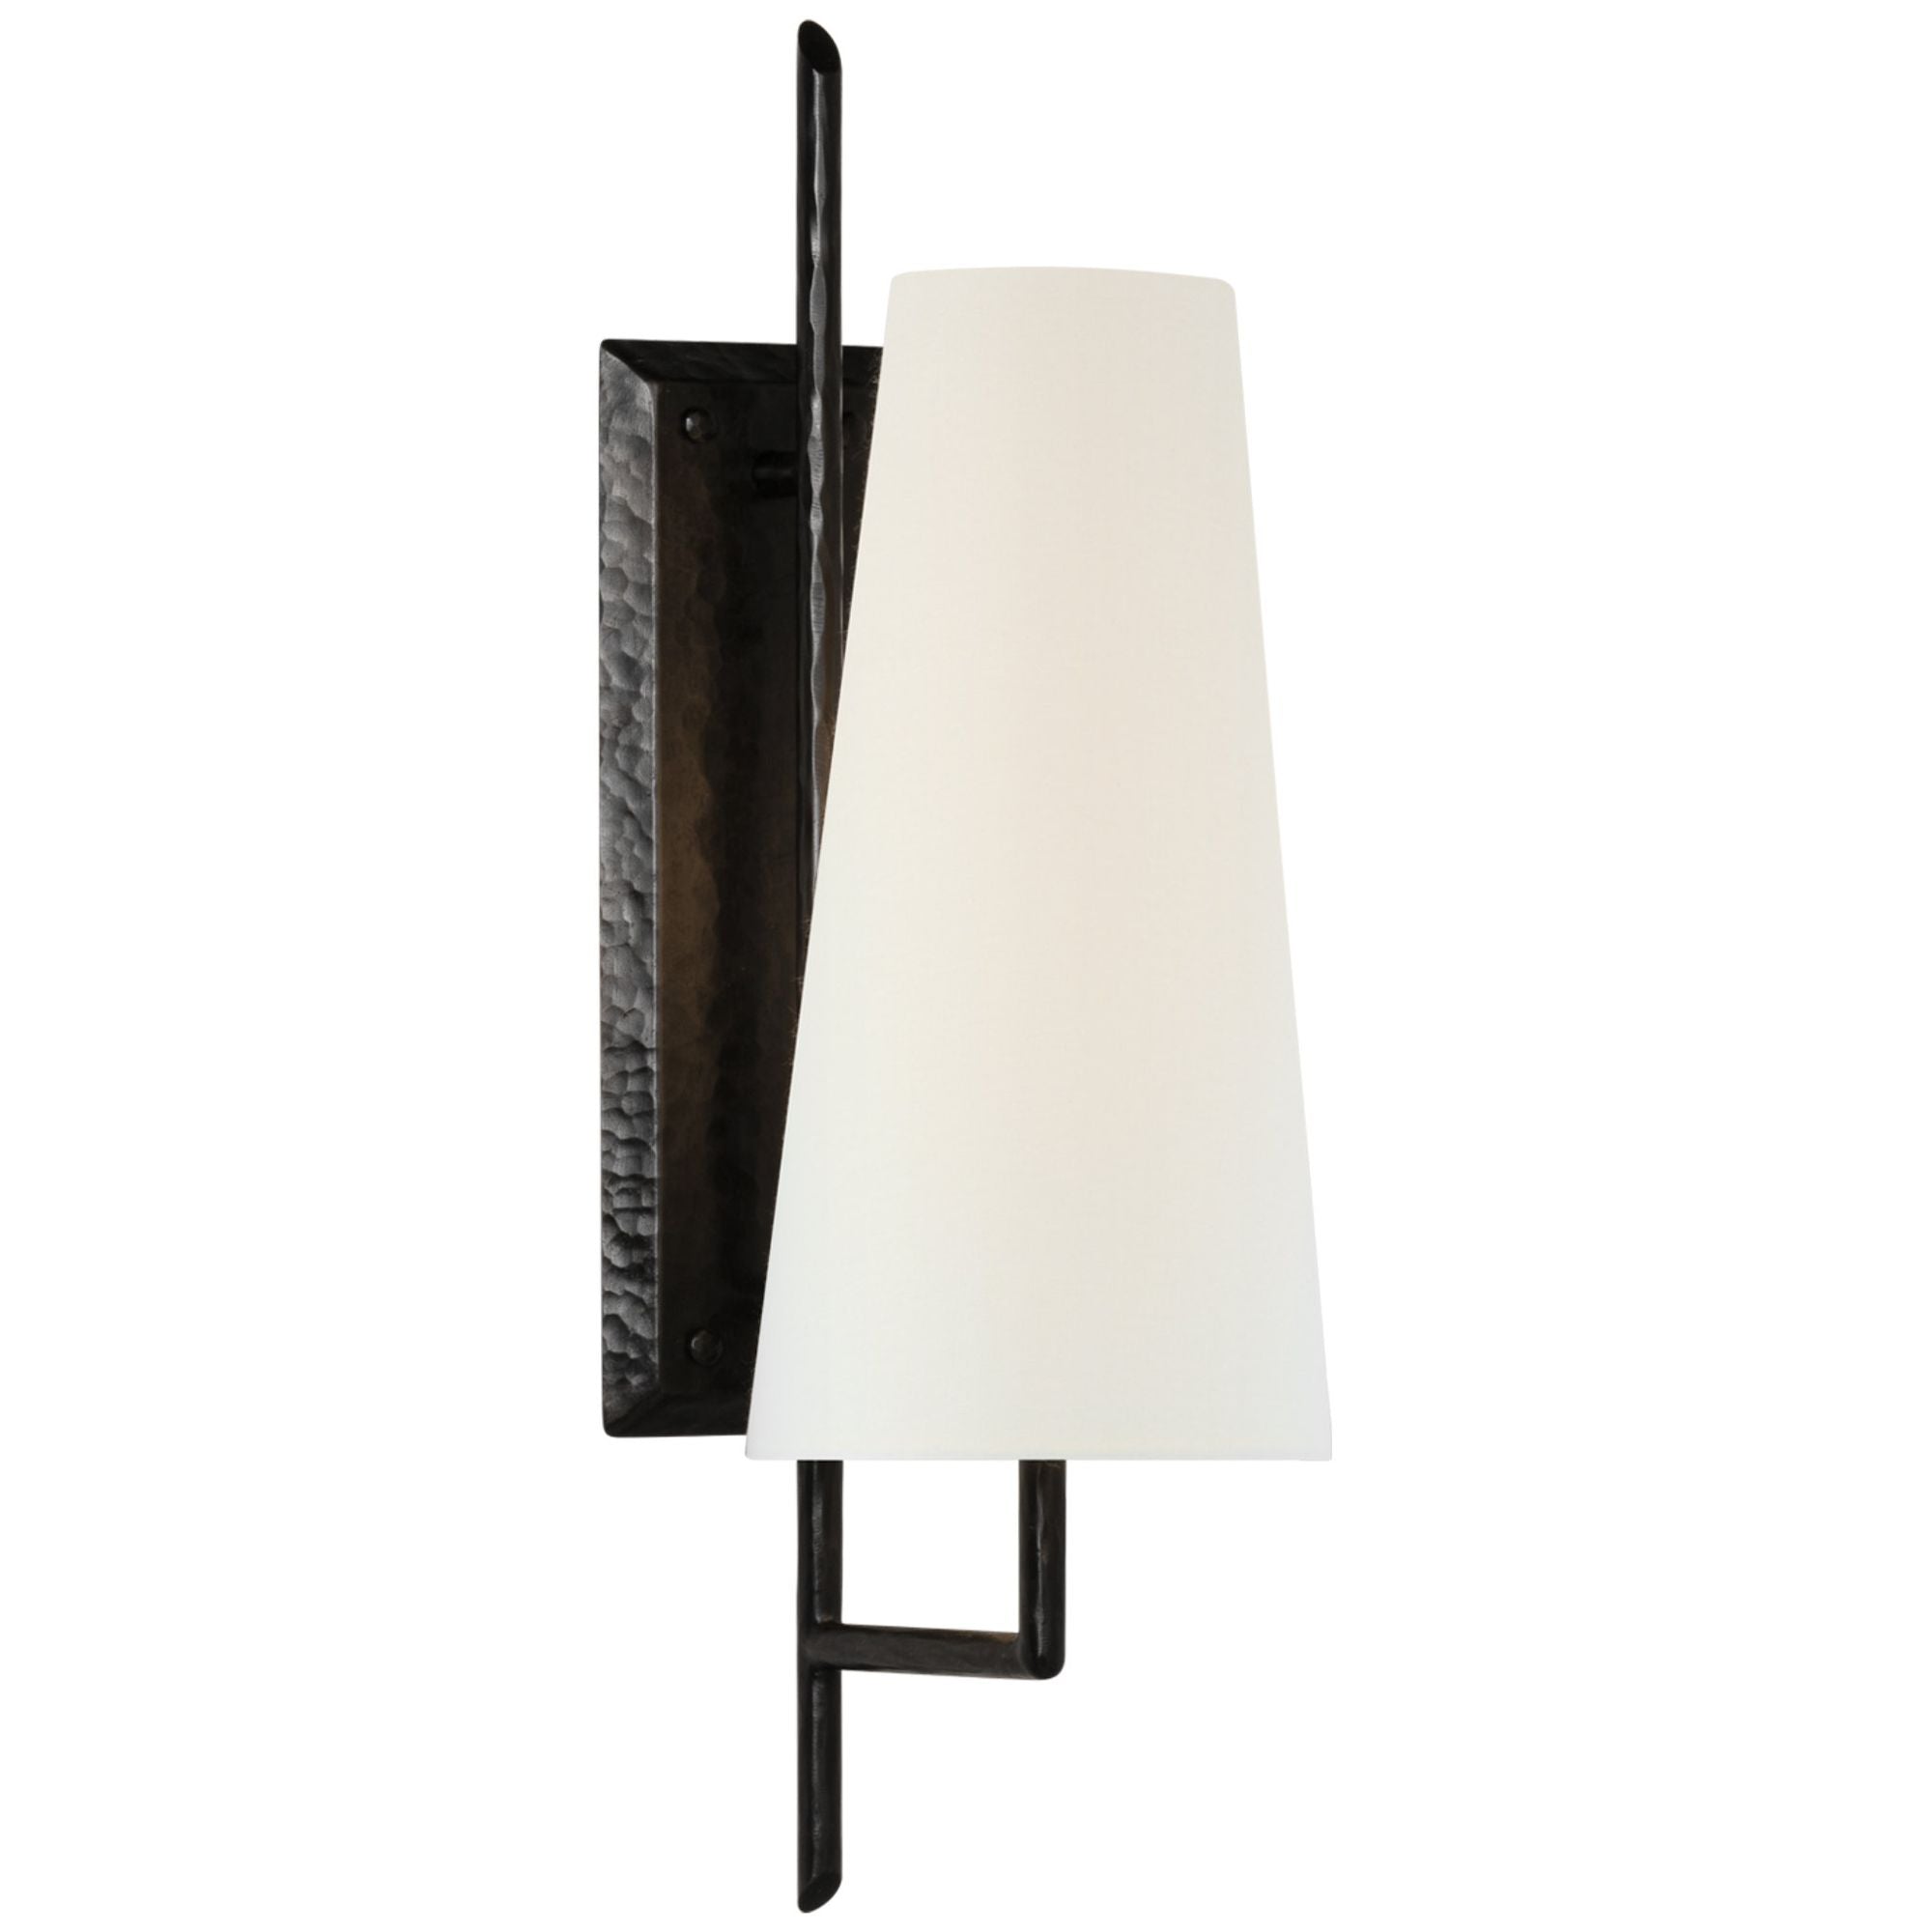 Chapman & Myers Ashton Large Single Sculpted Sconce in Aged Iron with Linen Shade